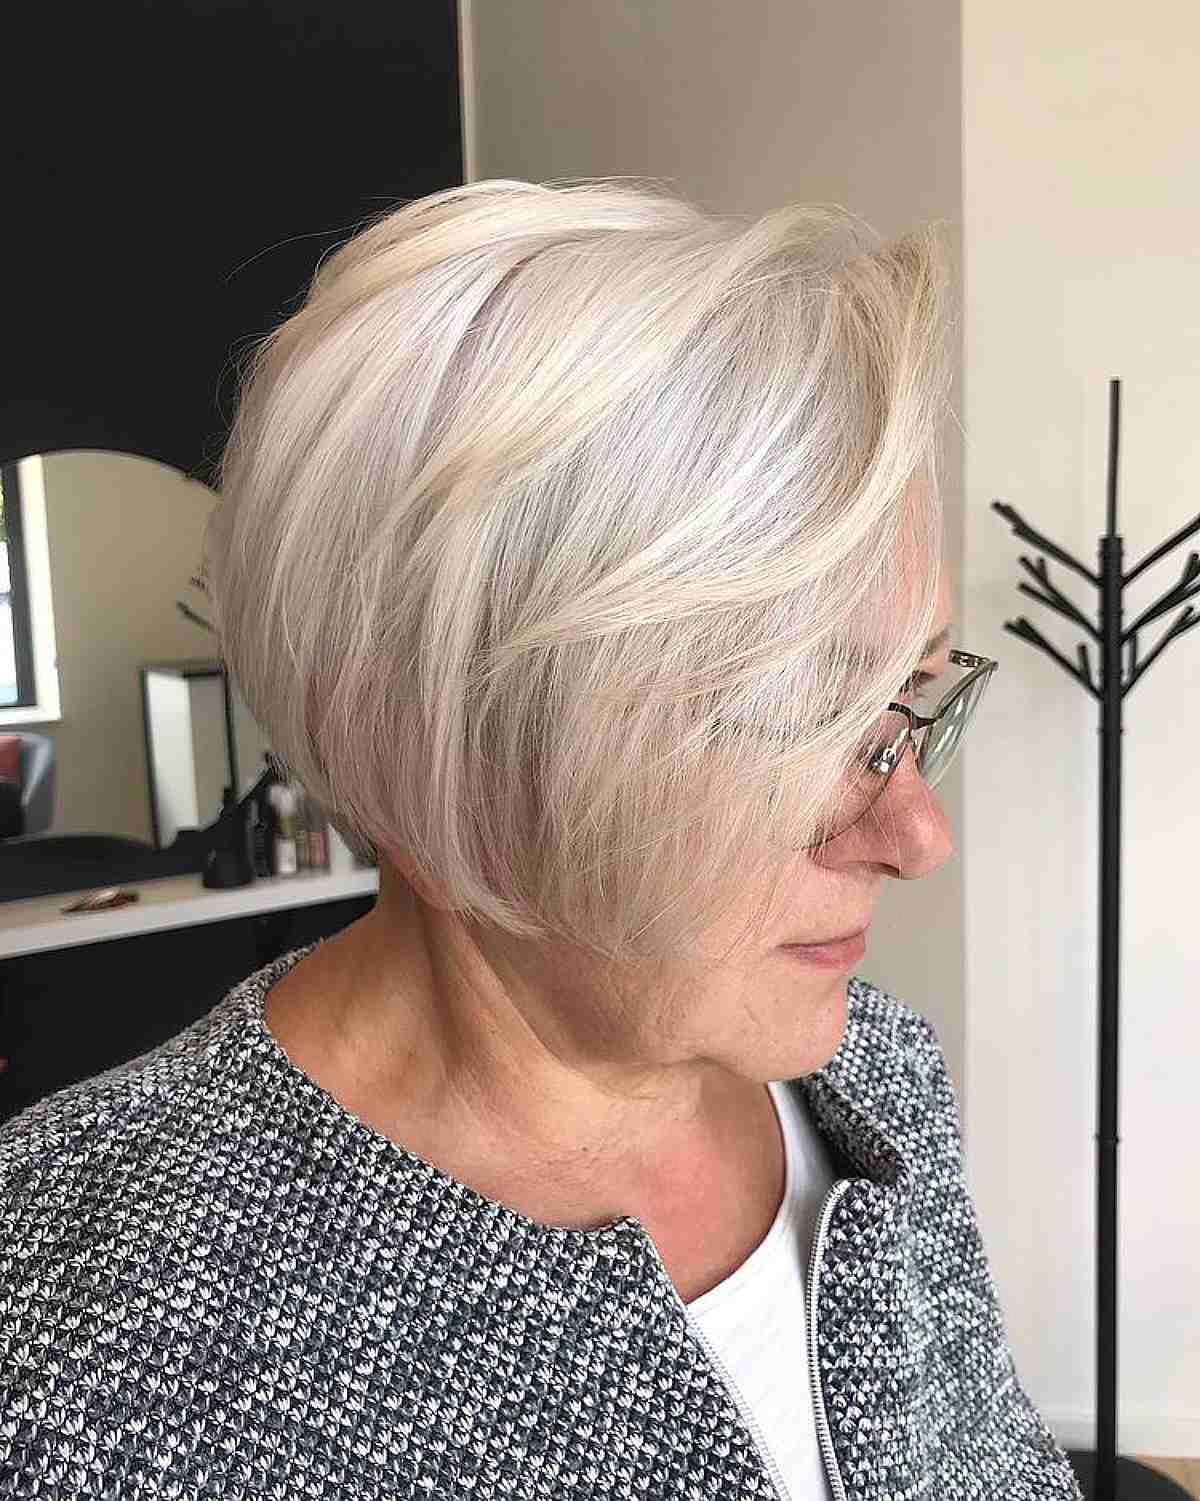 Long Pixie Bob on Thin Hair for Ladies in Their 50s